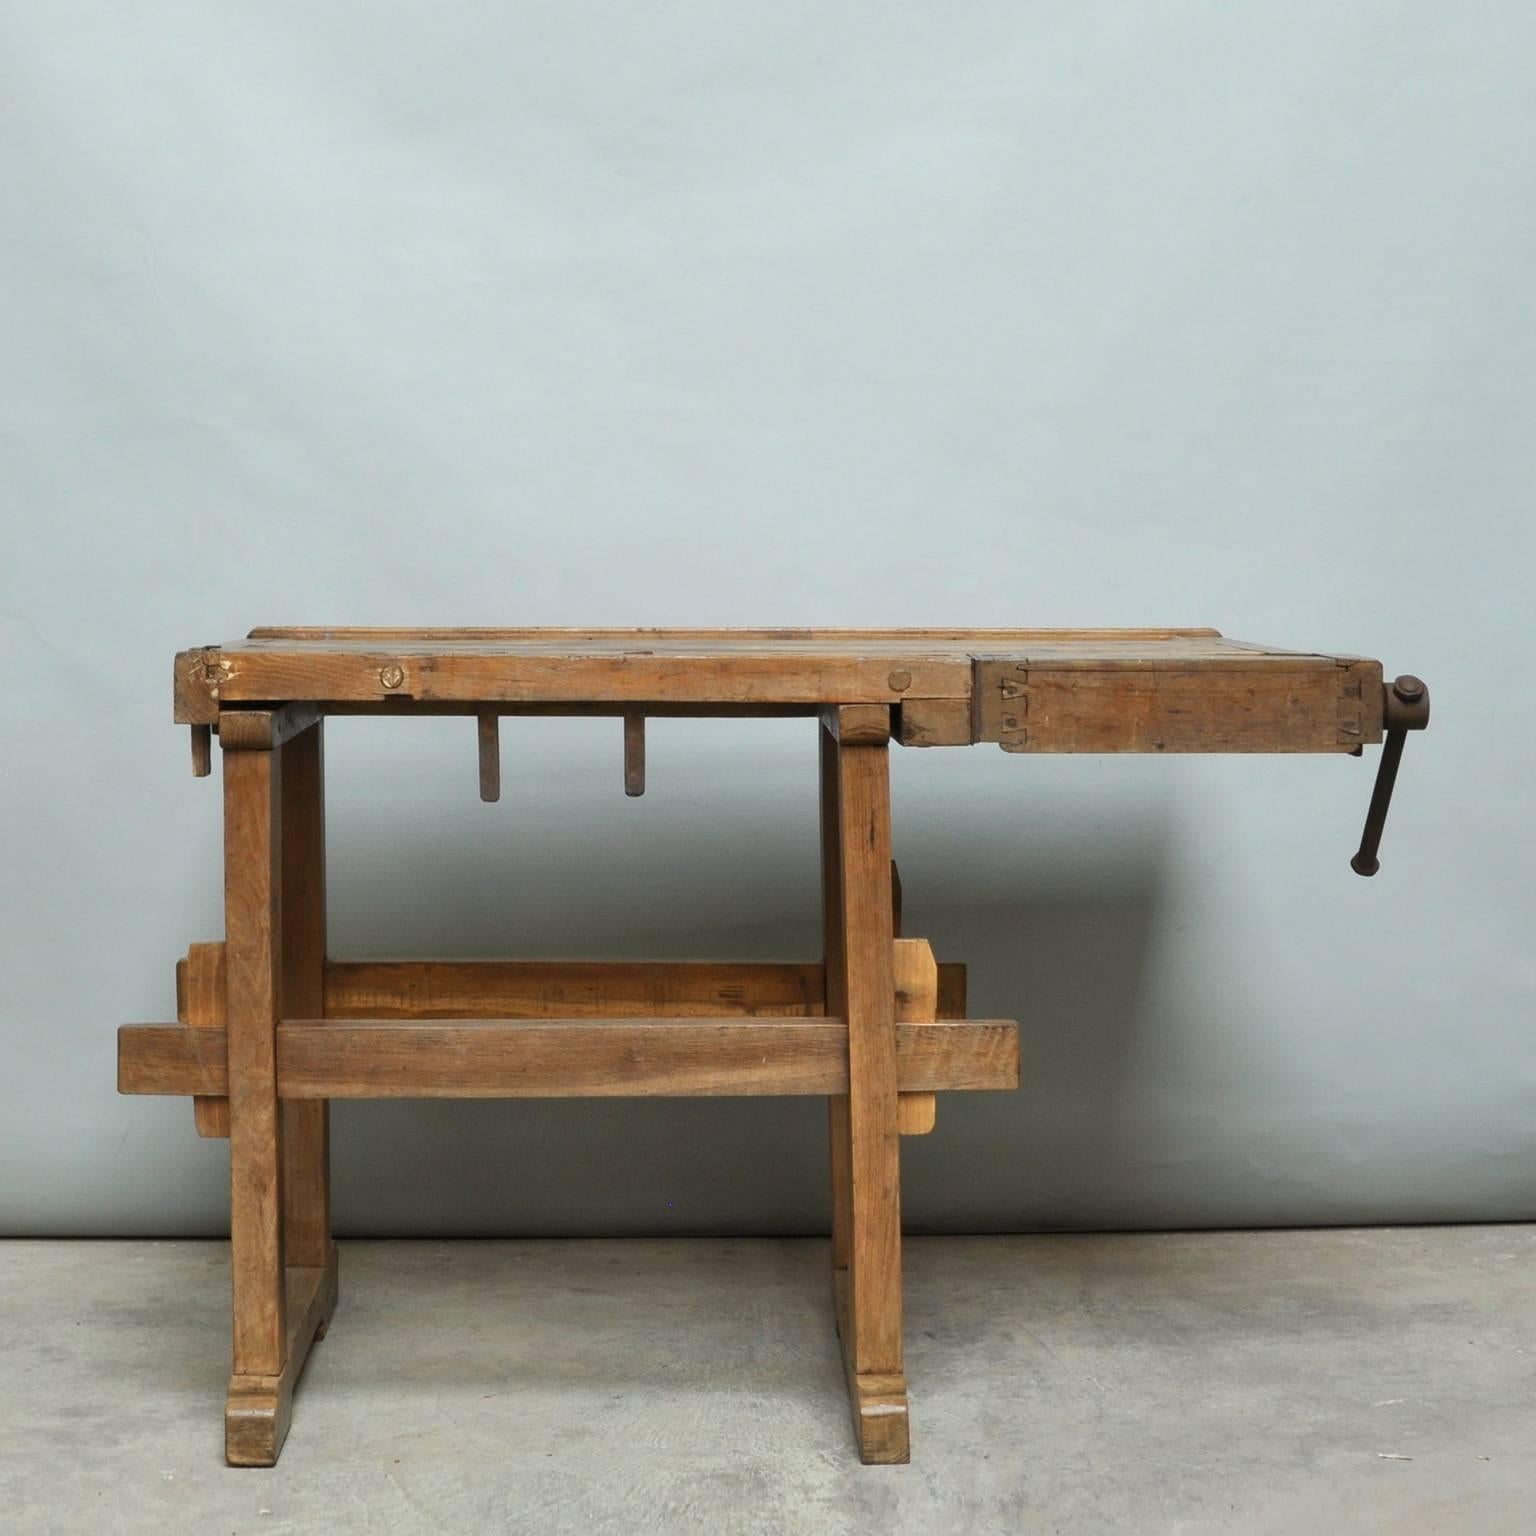 This vintage Hungarian carpenter’s workbench features one iron vice and a recessed tray where the carpenter would lay his tools. It was manufactured, circa 1935.